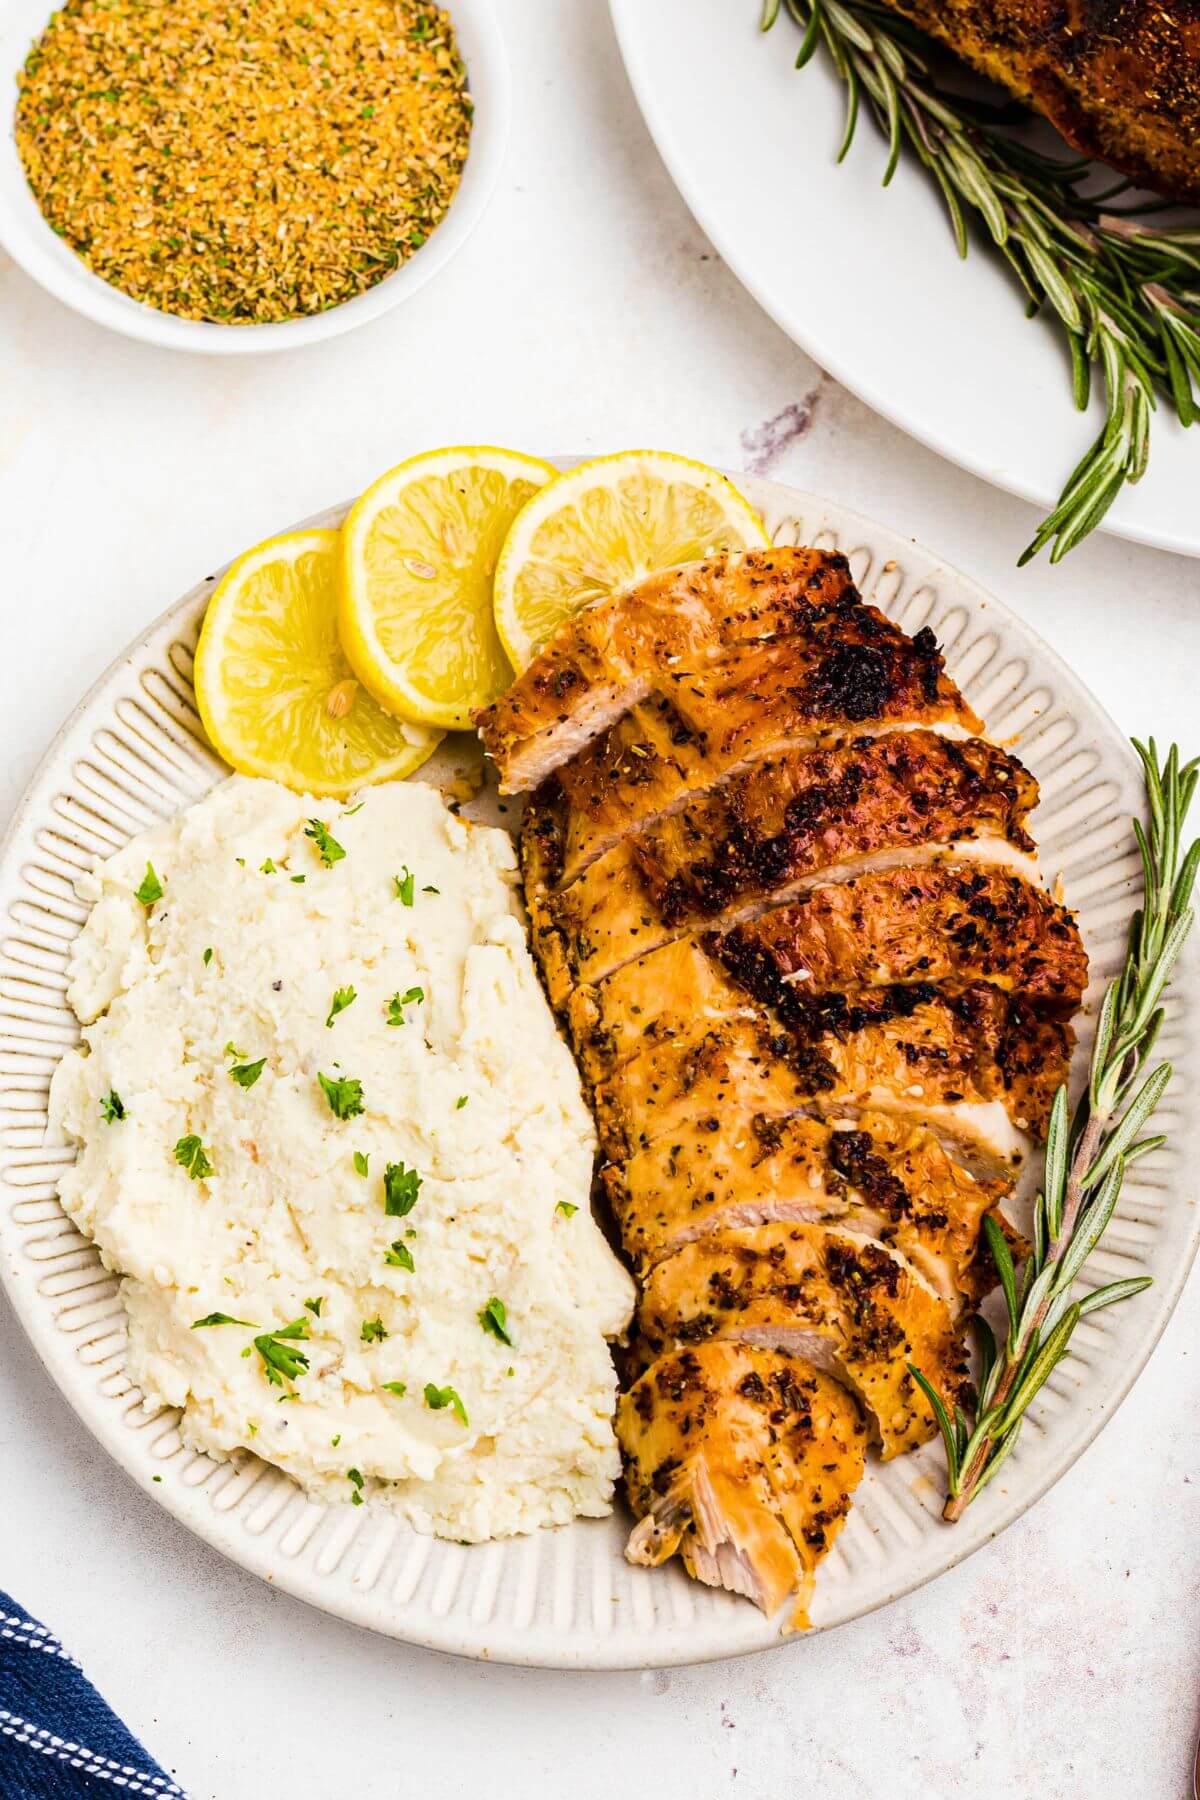 Juicy slices of turkey breast on a white plate with mashed potatoes and lemon slices. 